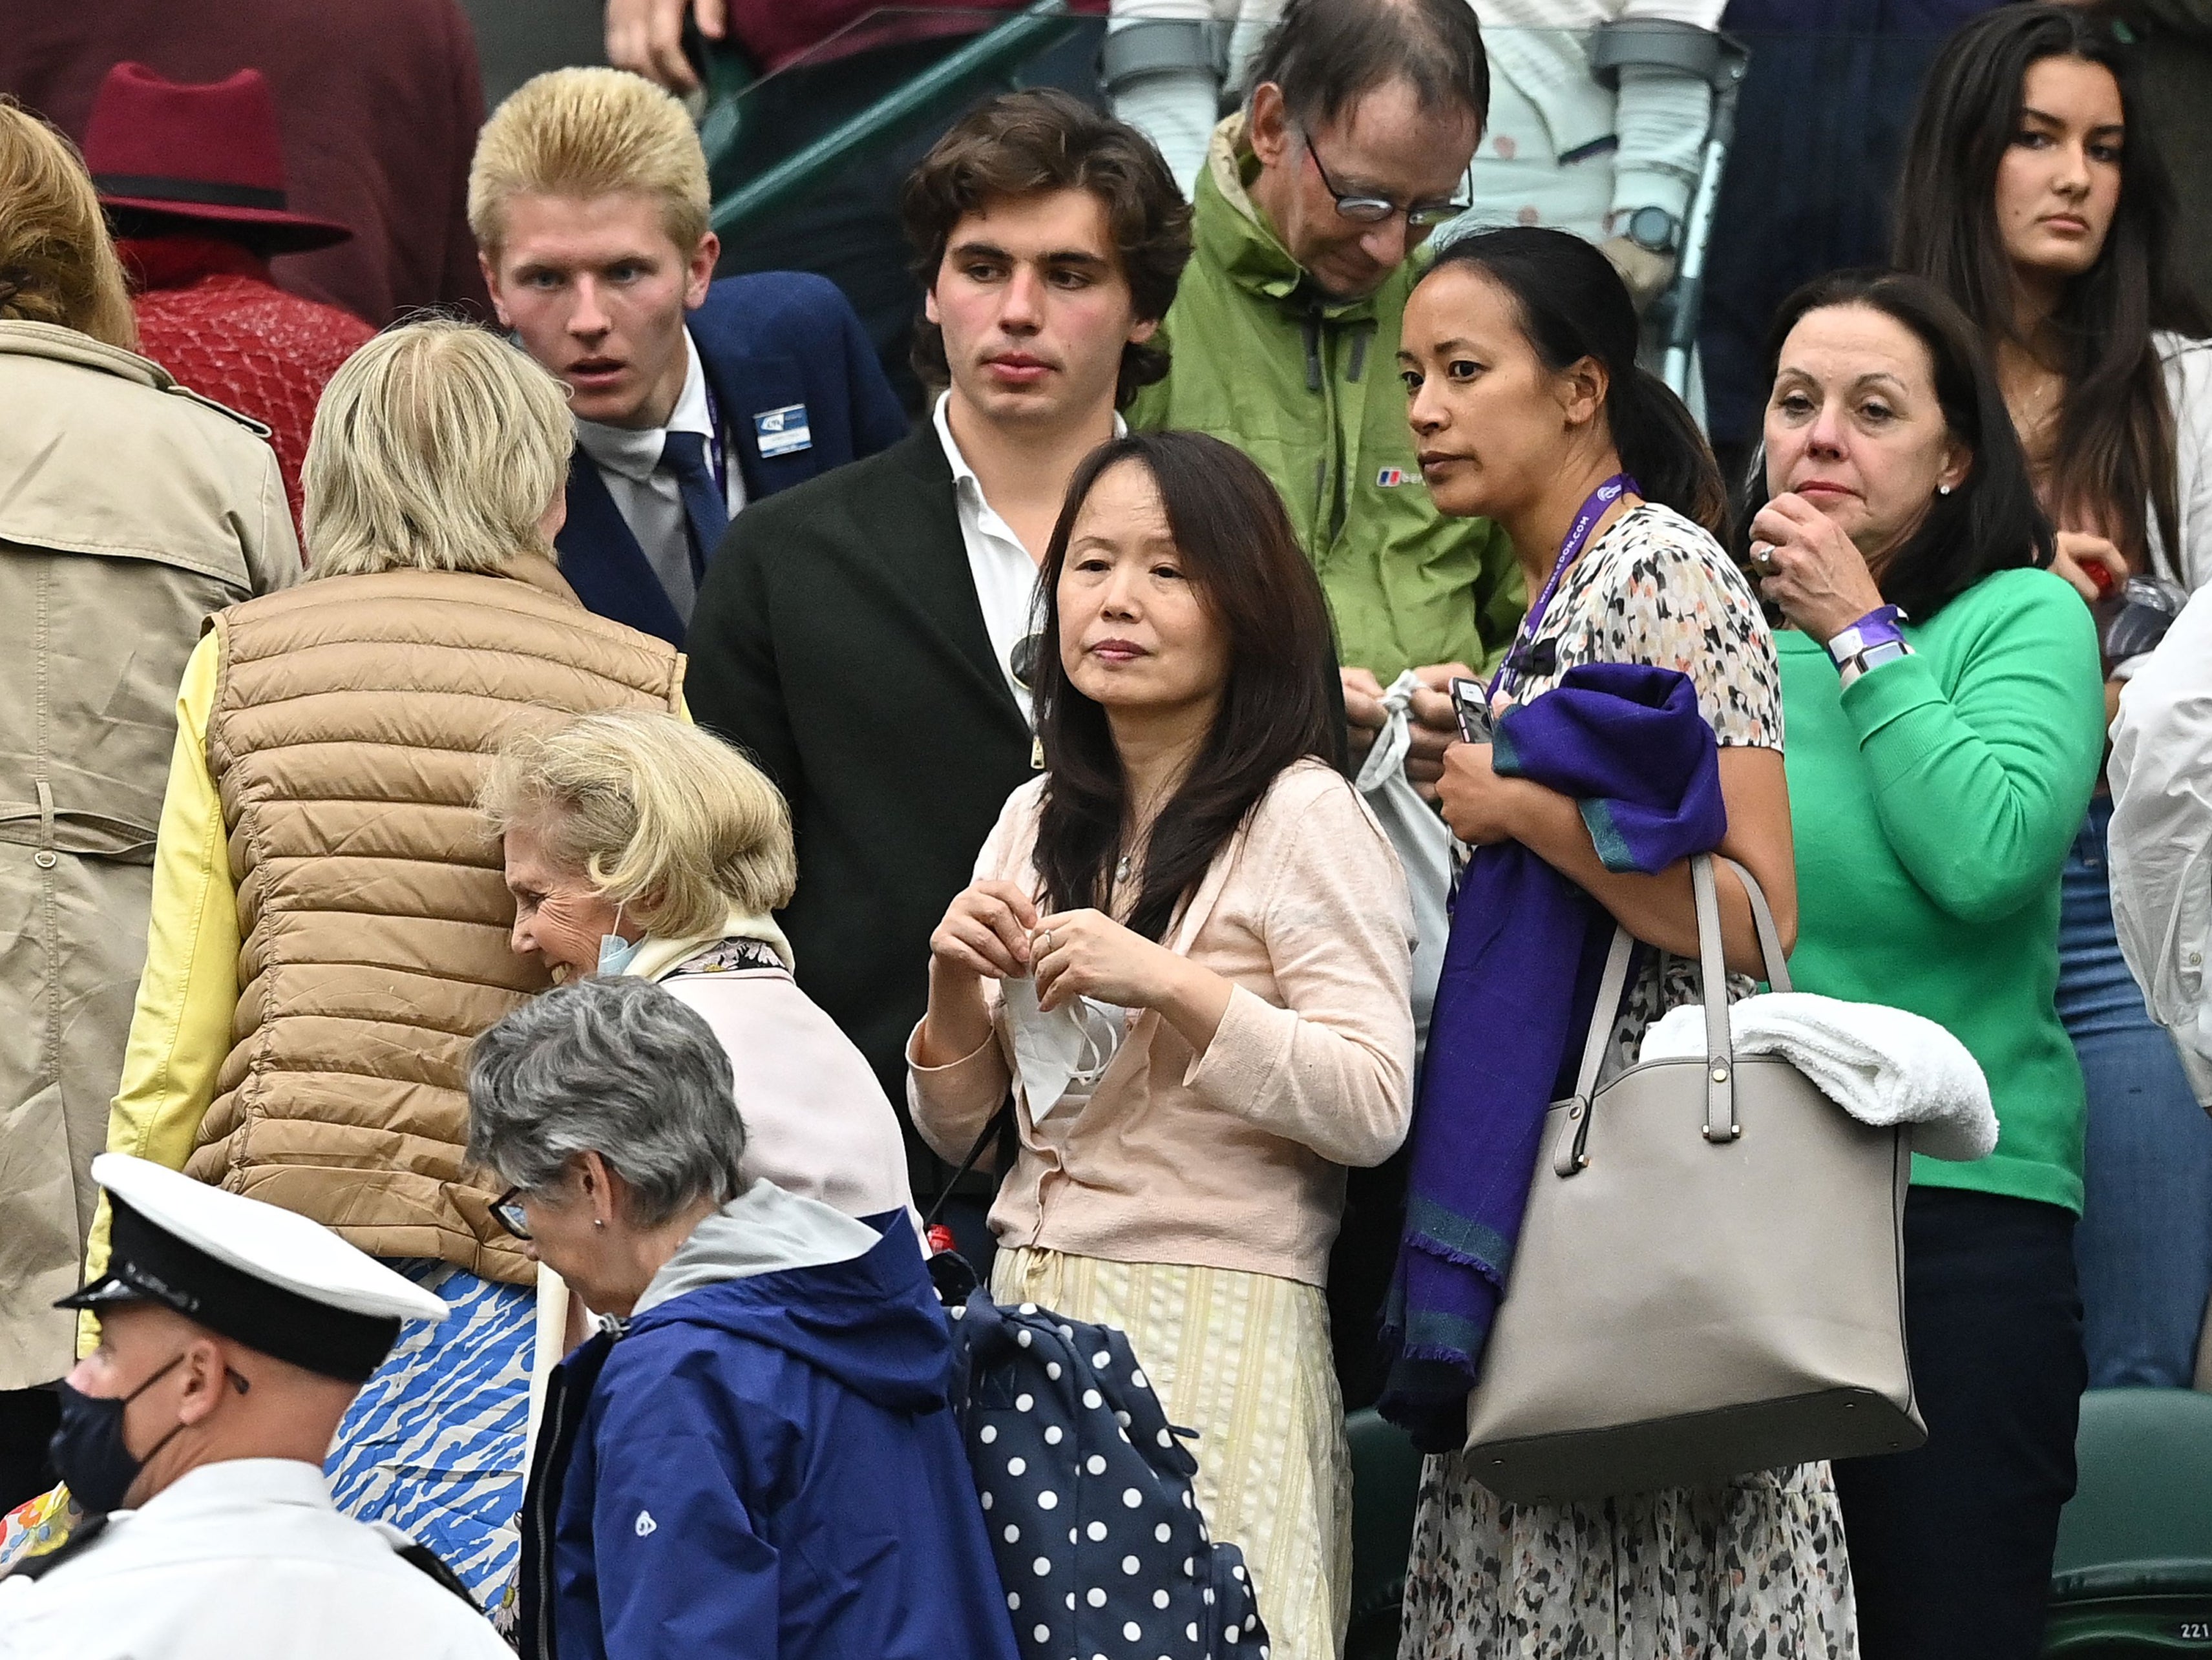 Renee Raducanu (centre) among the crowd for her daughter’s match at Wimbledon on 5 July 2021